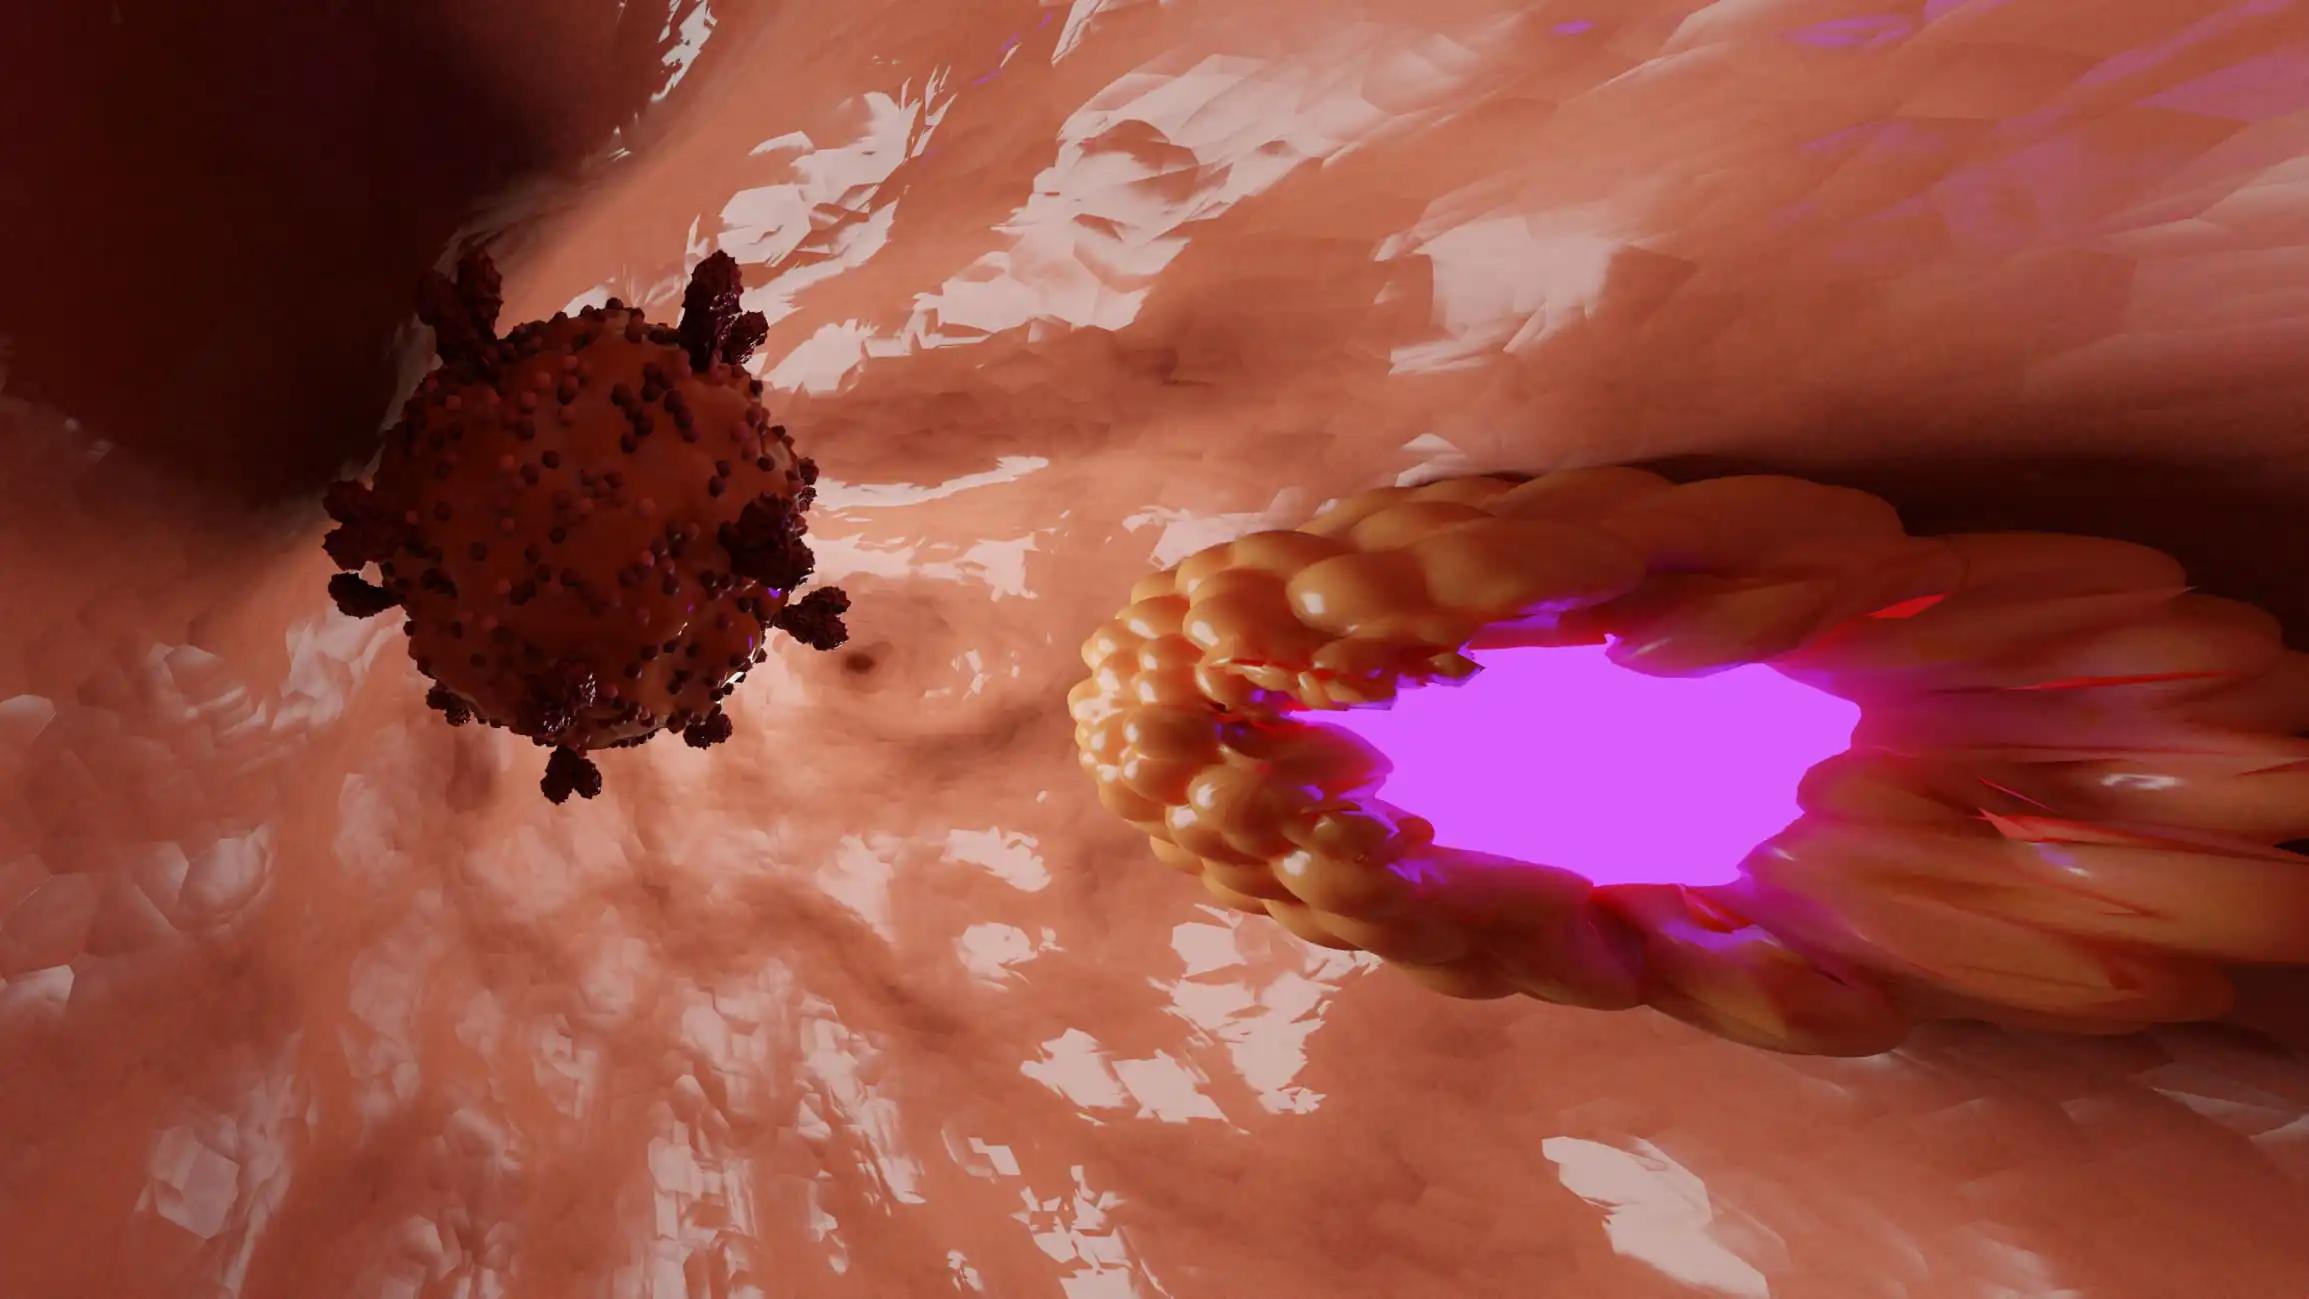 Close-up View of Prostate Cancer Cells in Body